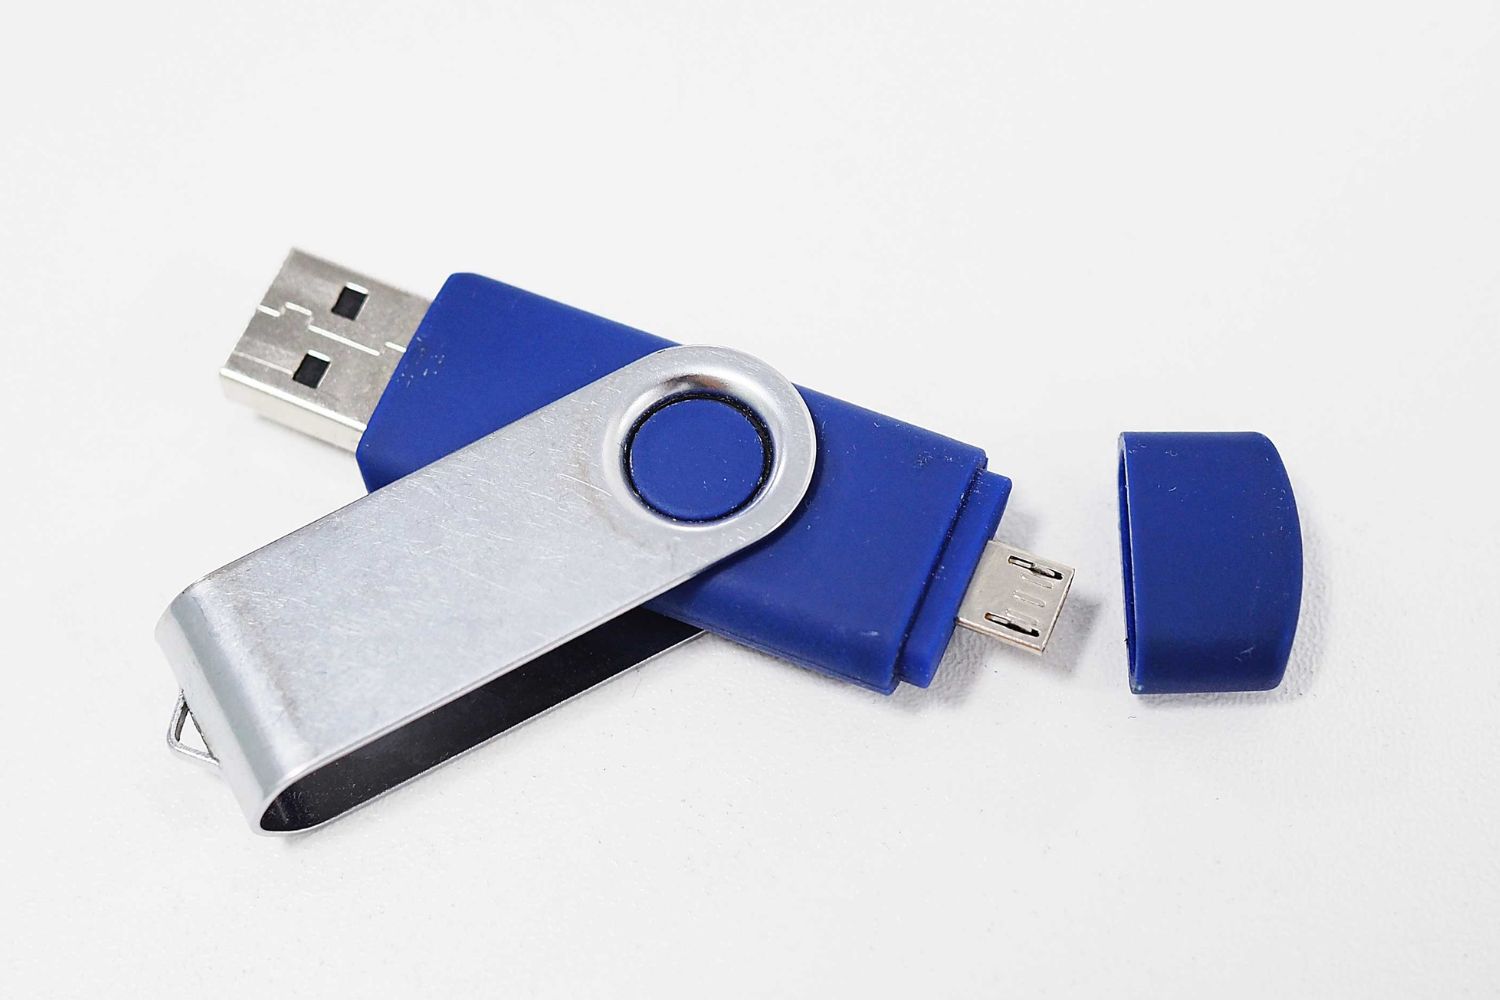 What's the Difference Between a Photo Stick & a Flash Drive